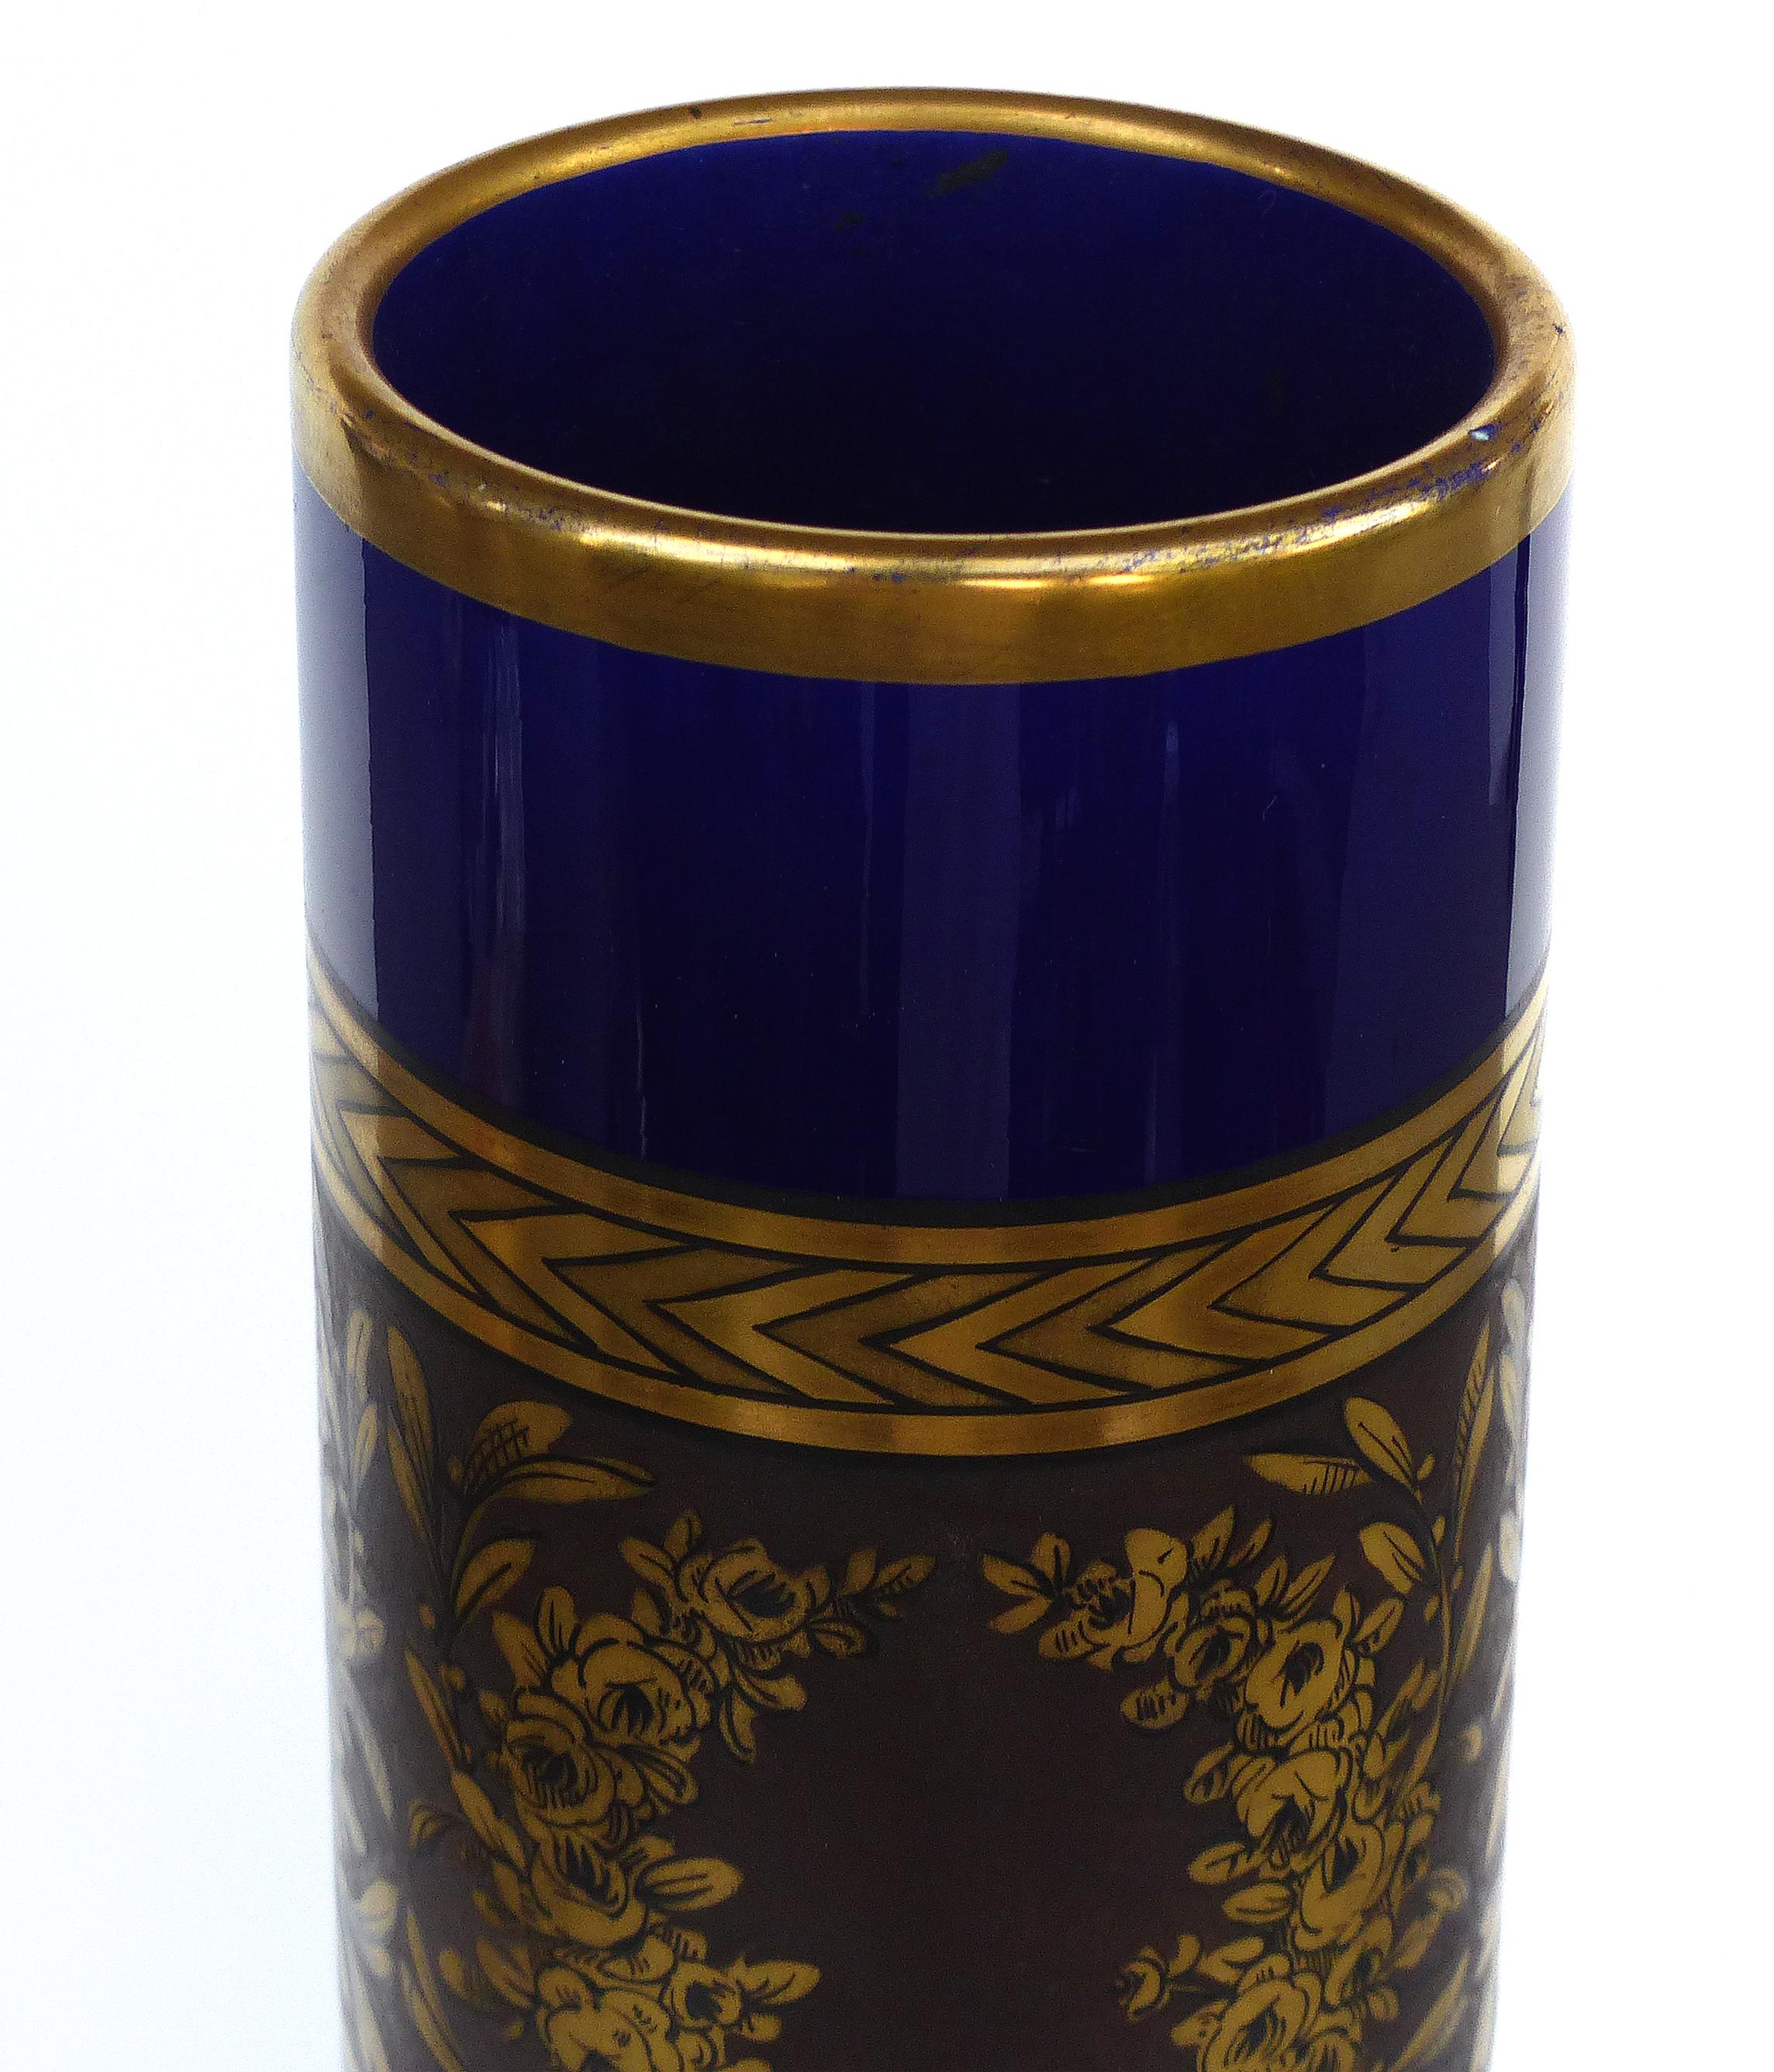 Overscale Antique Sèvres Porcelain Urn Vases in Cobalt Blue with Gilt Accents In Good Condition For Sale In Miami, FL